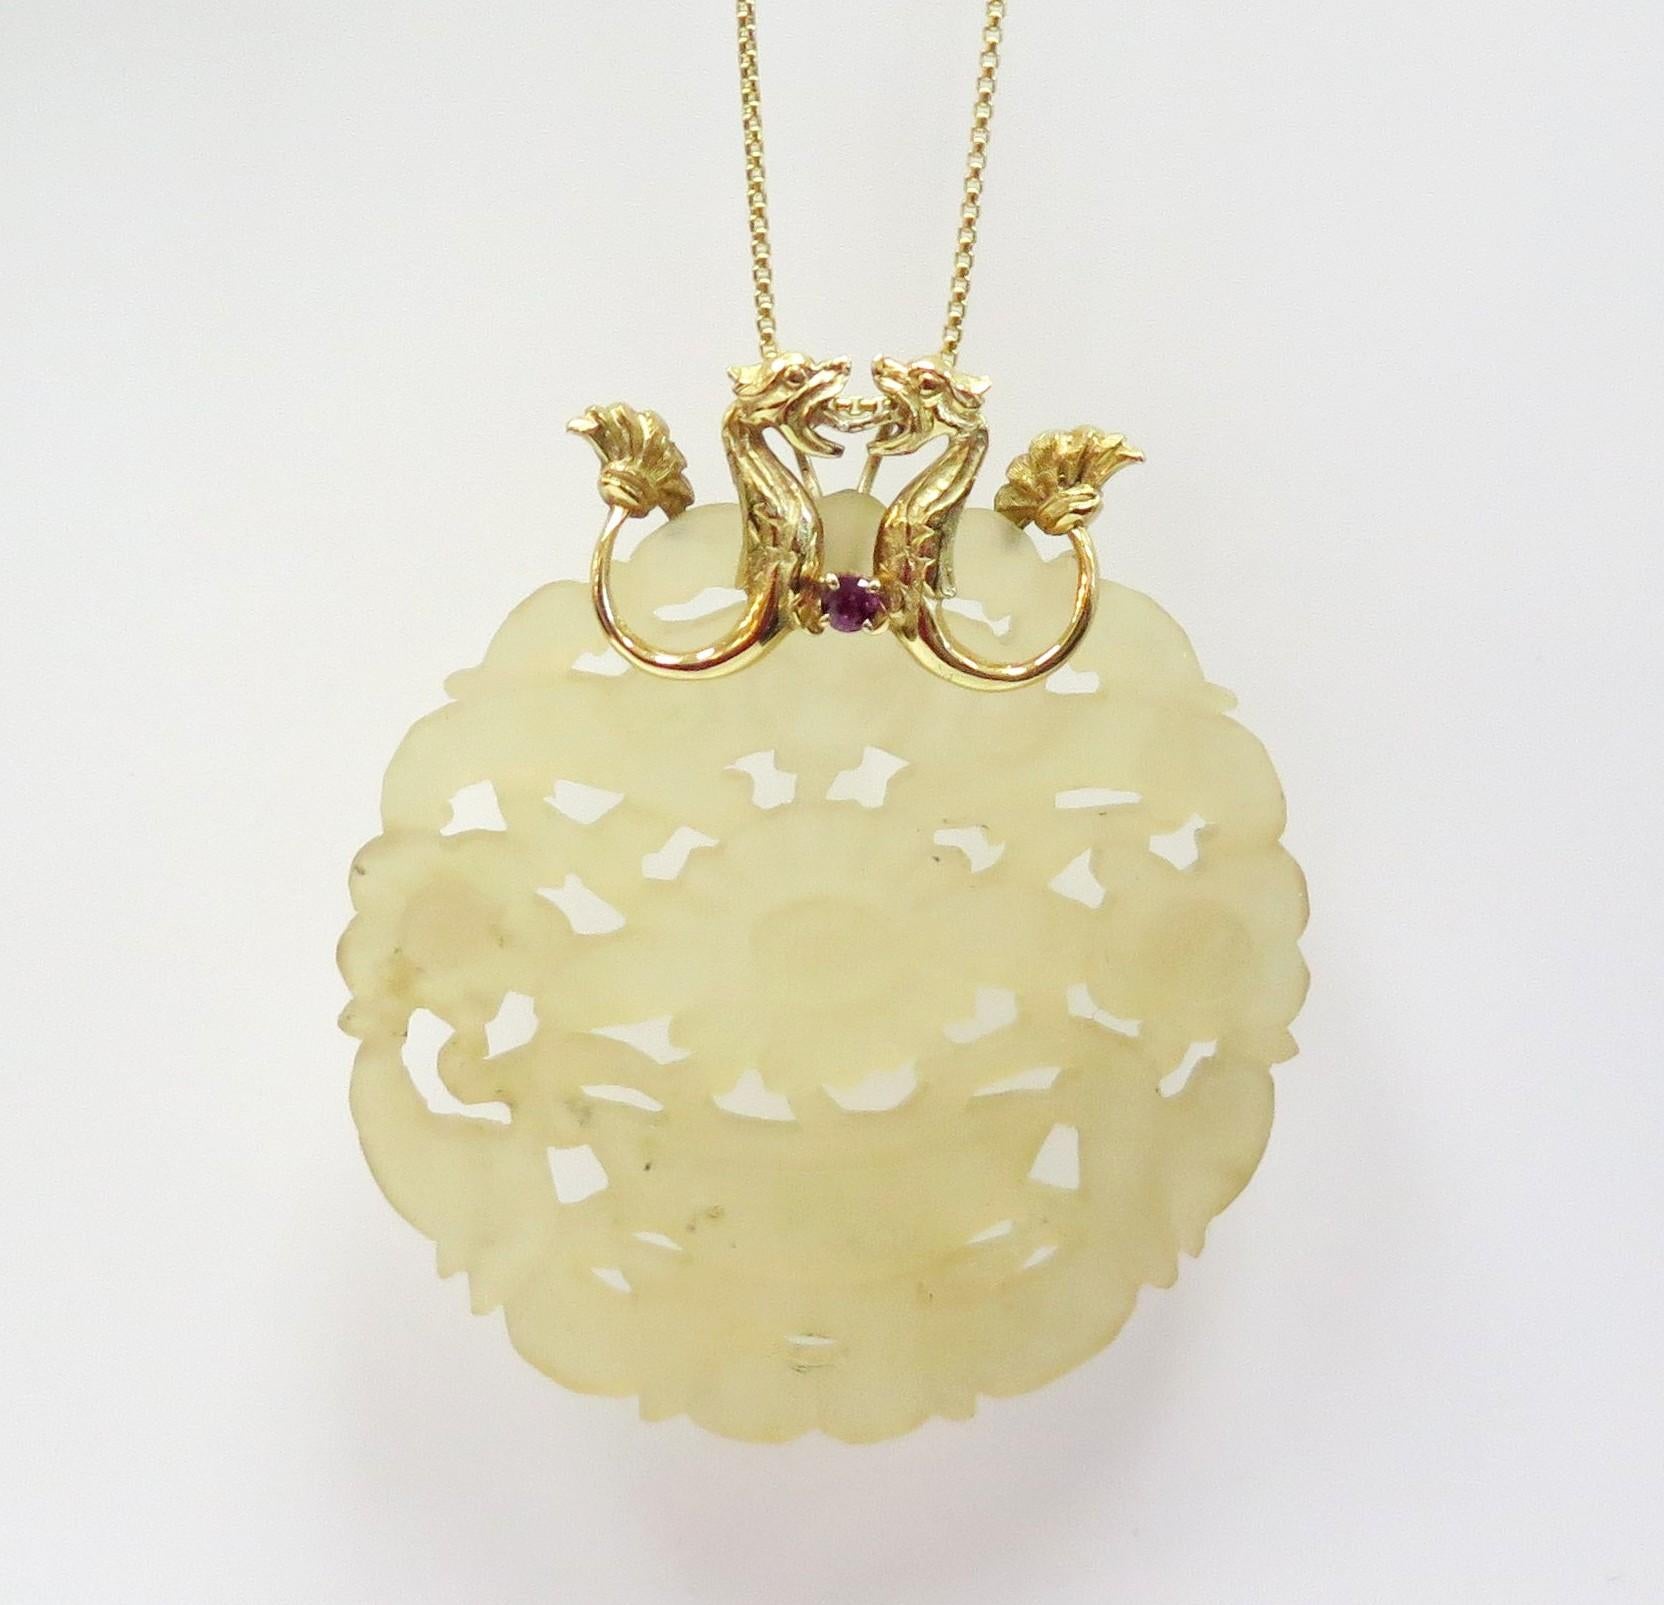 Two 14 karat yellow gold dragons that meet in the middle with a ruby and fan tails create a bail that holds a large round carved yellow jade pendant. 

Measurements: 3